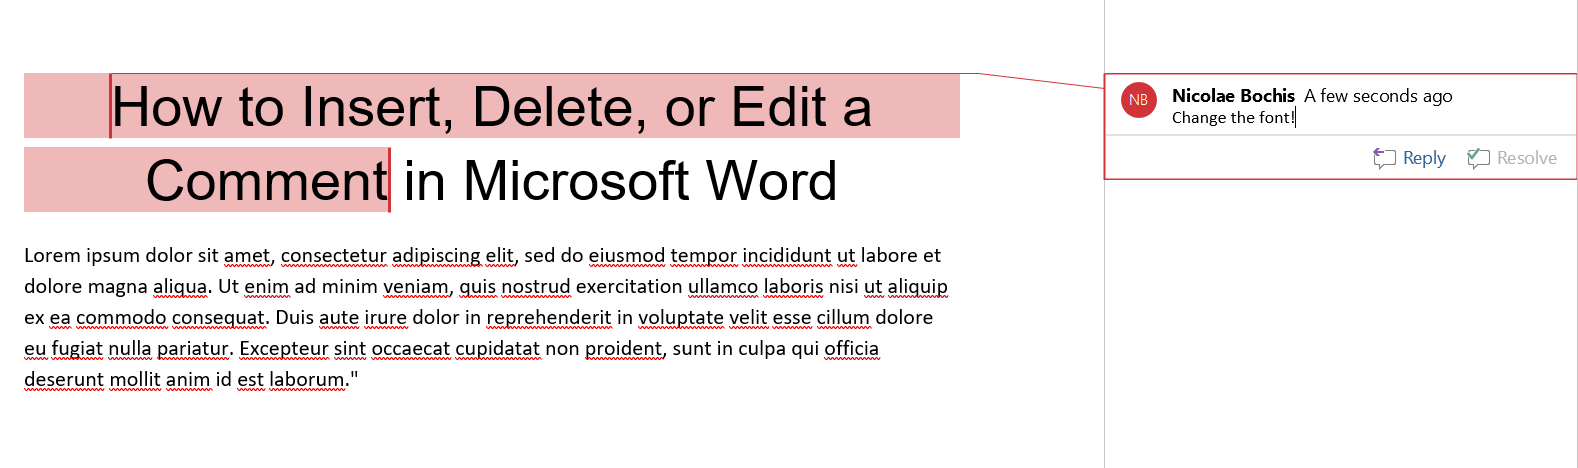 How to Insert  Delete  or Edit a Comment in Microsoft Word - 51